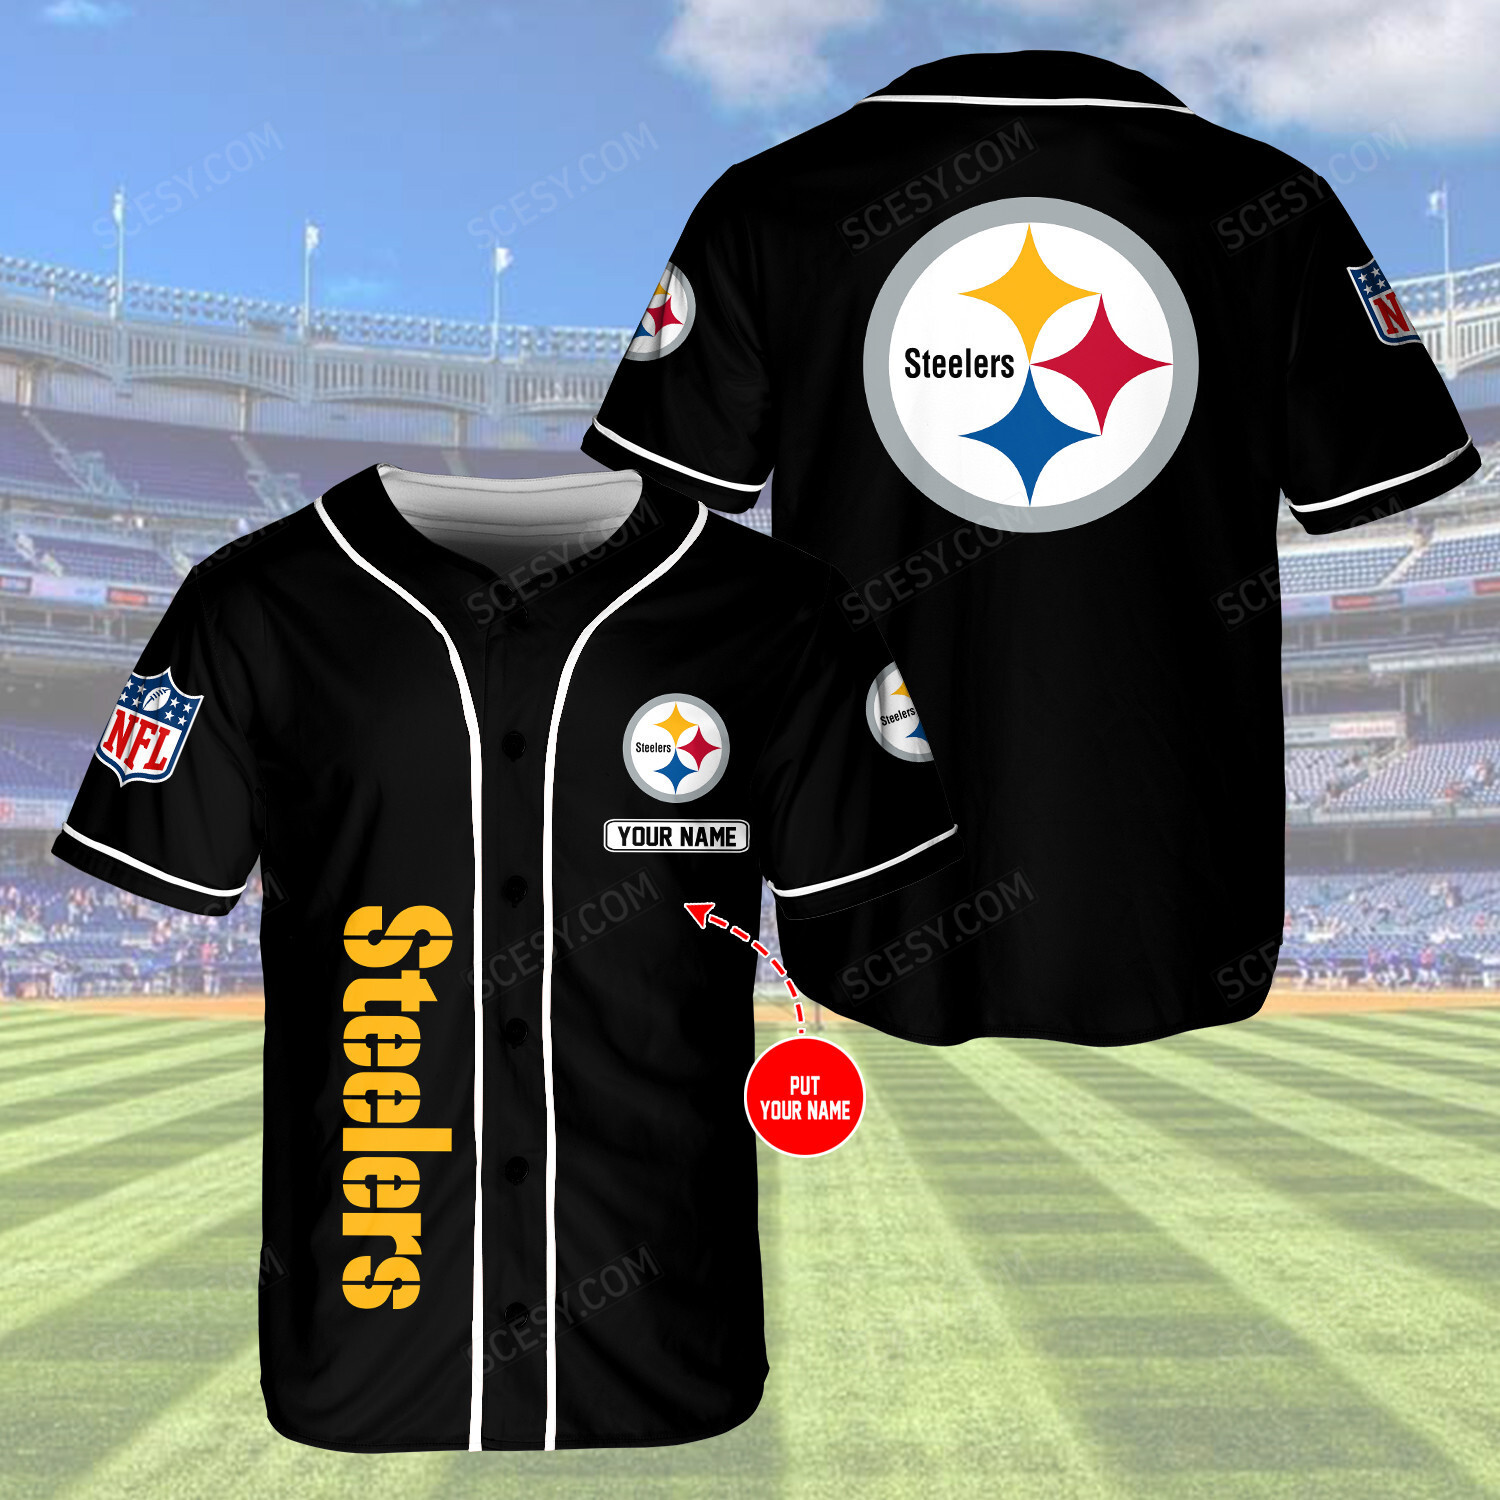 Pittsburgh Steelers Baseball Jersey Custom Fun-loving Steelers Gift -  Personalized Gifts: Family, Sports, Occasions, Trending